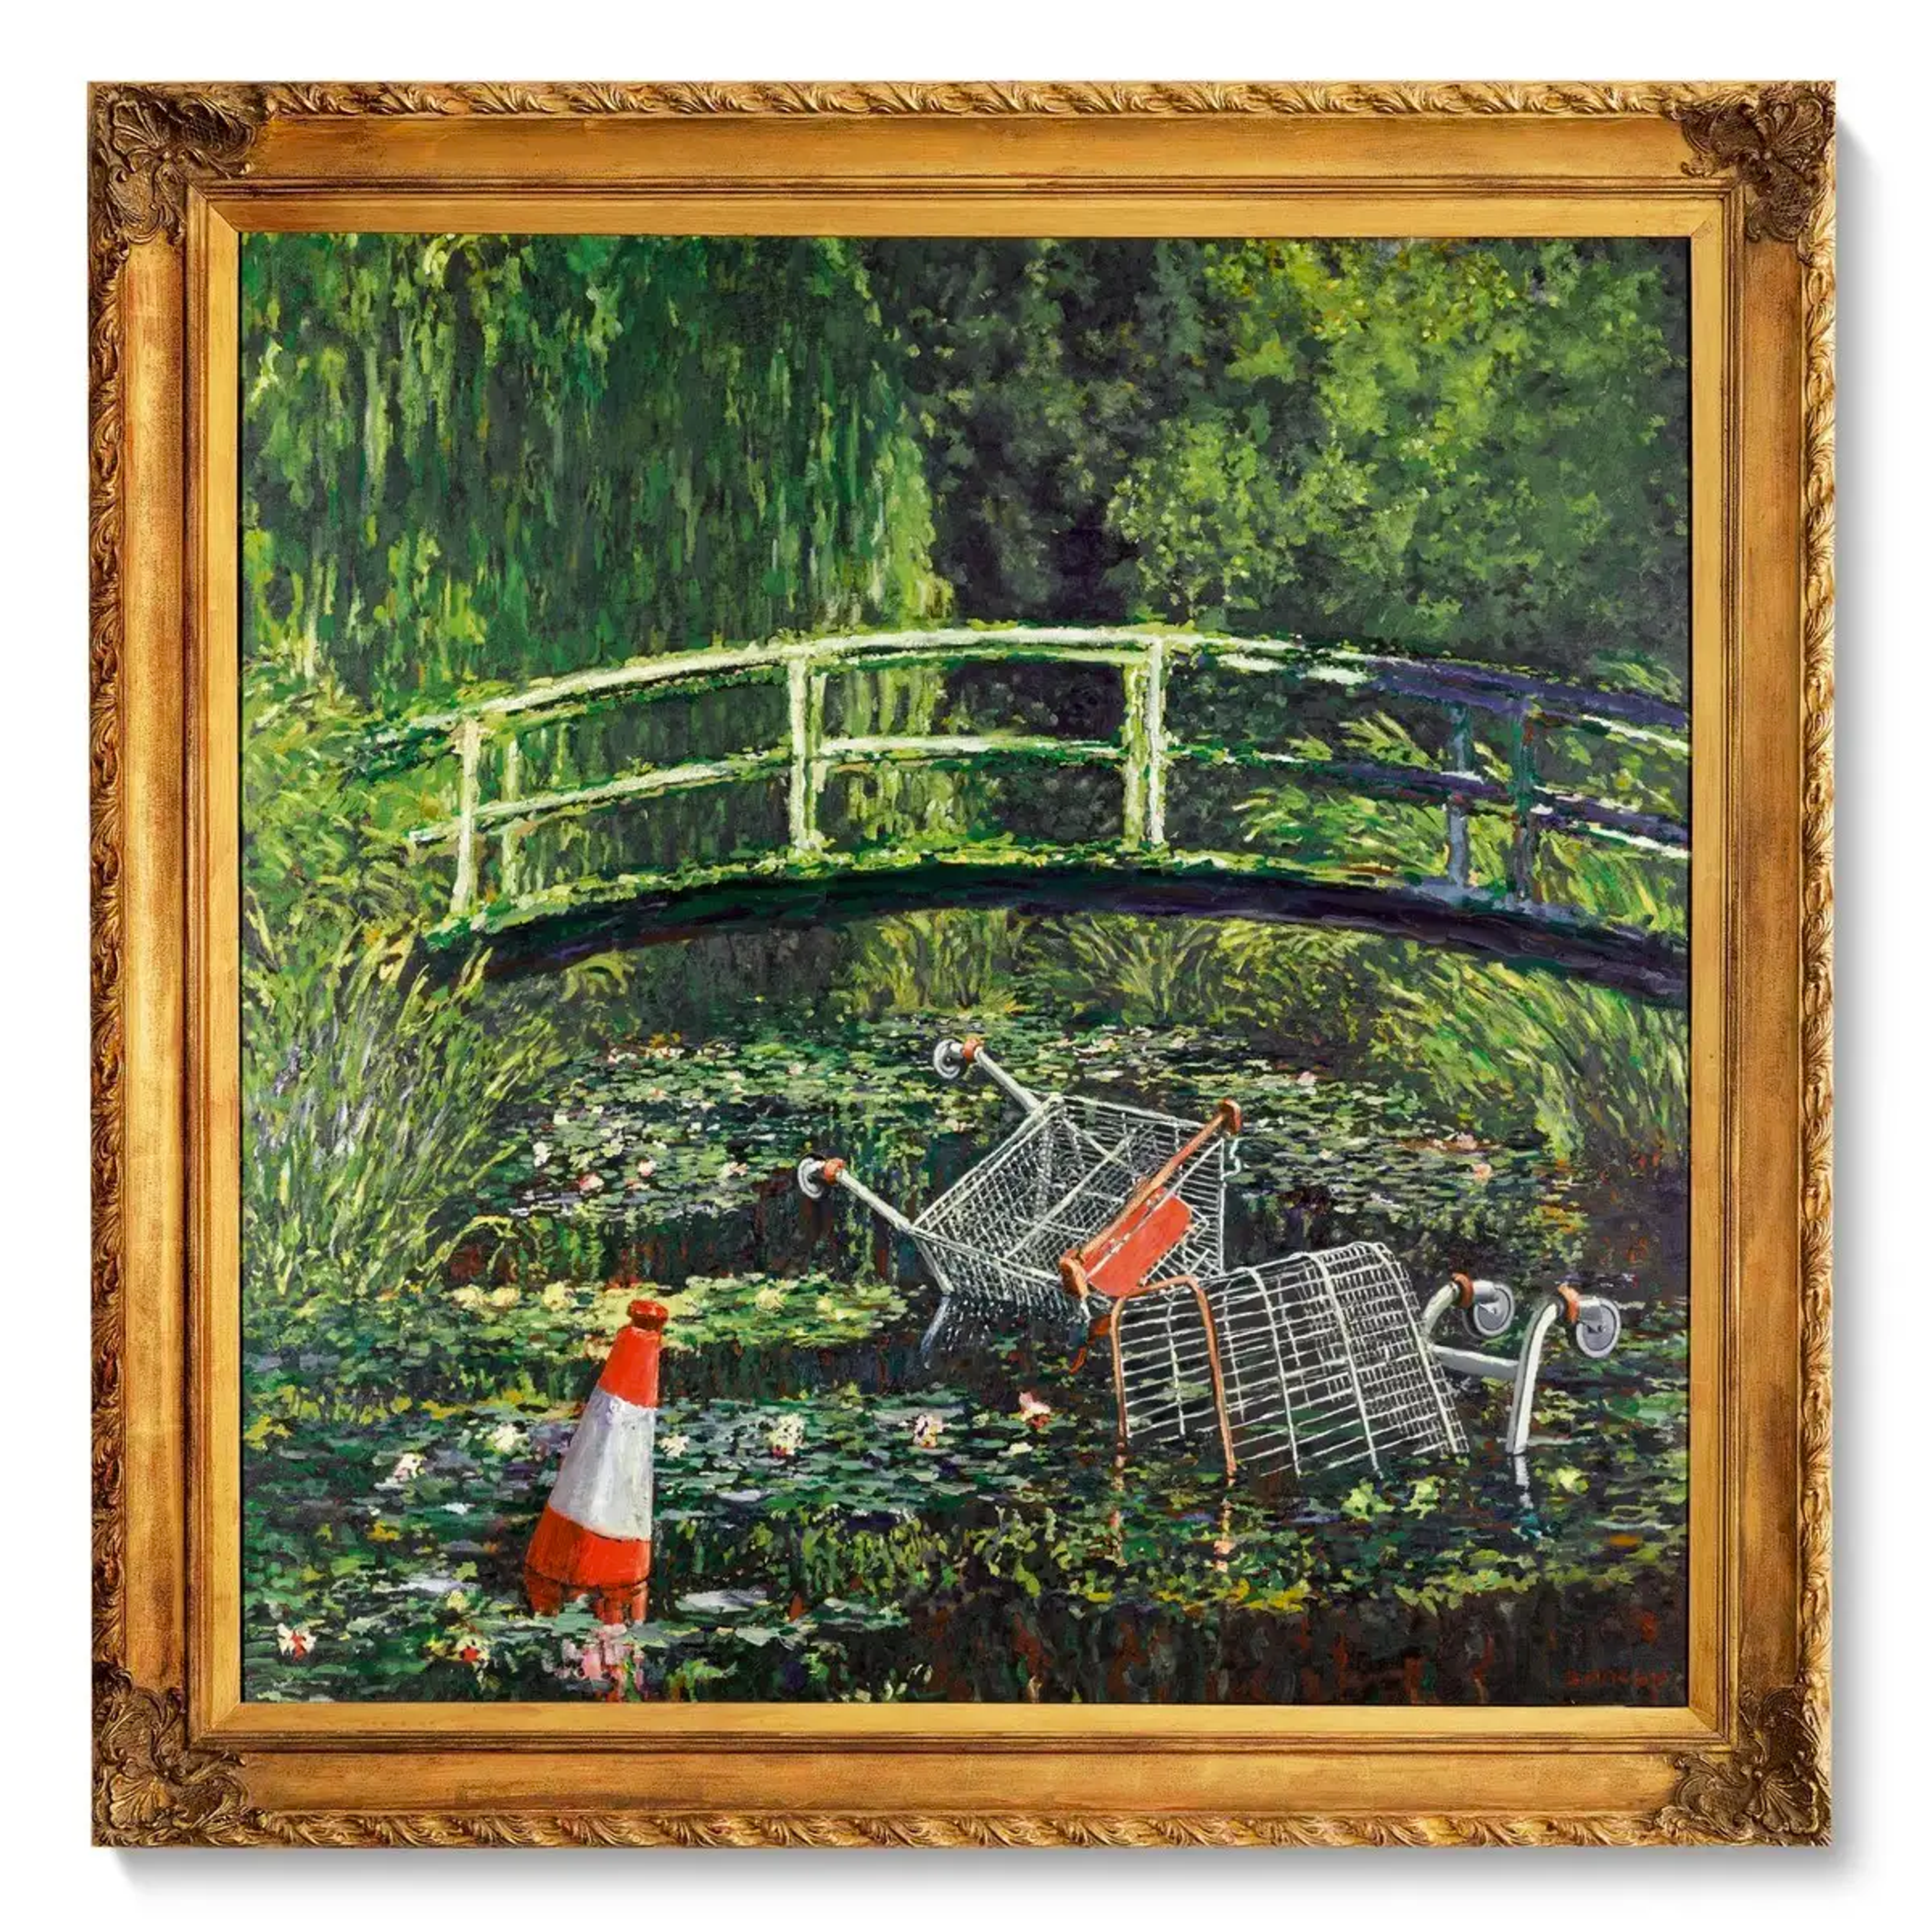 This image shows a painting within a golden frame. The painting shows Monet's garden at Giverny, with the Japanese bridge overlooking a pond with water lilies. Banksy, however, has added a traffic cone and two discarded supermarket trolleys to the scene.